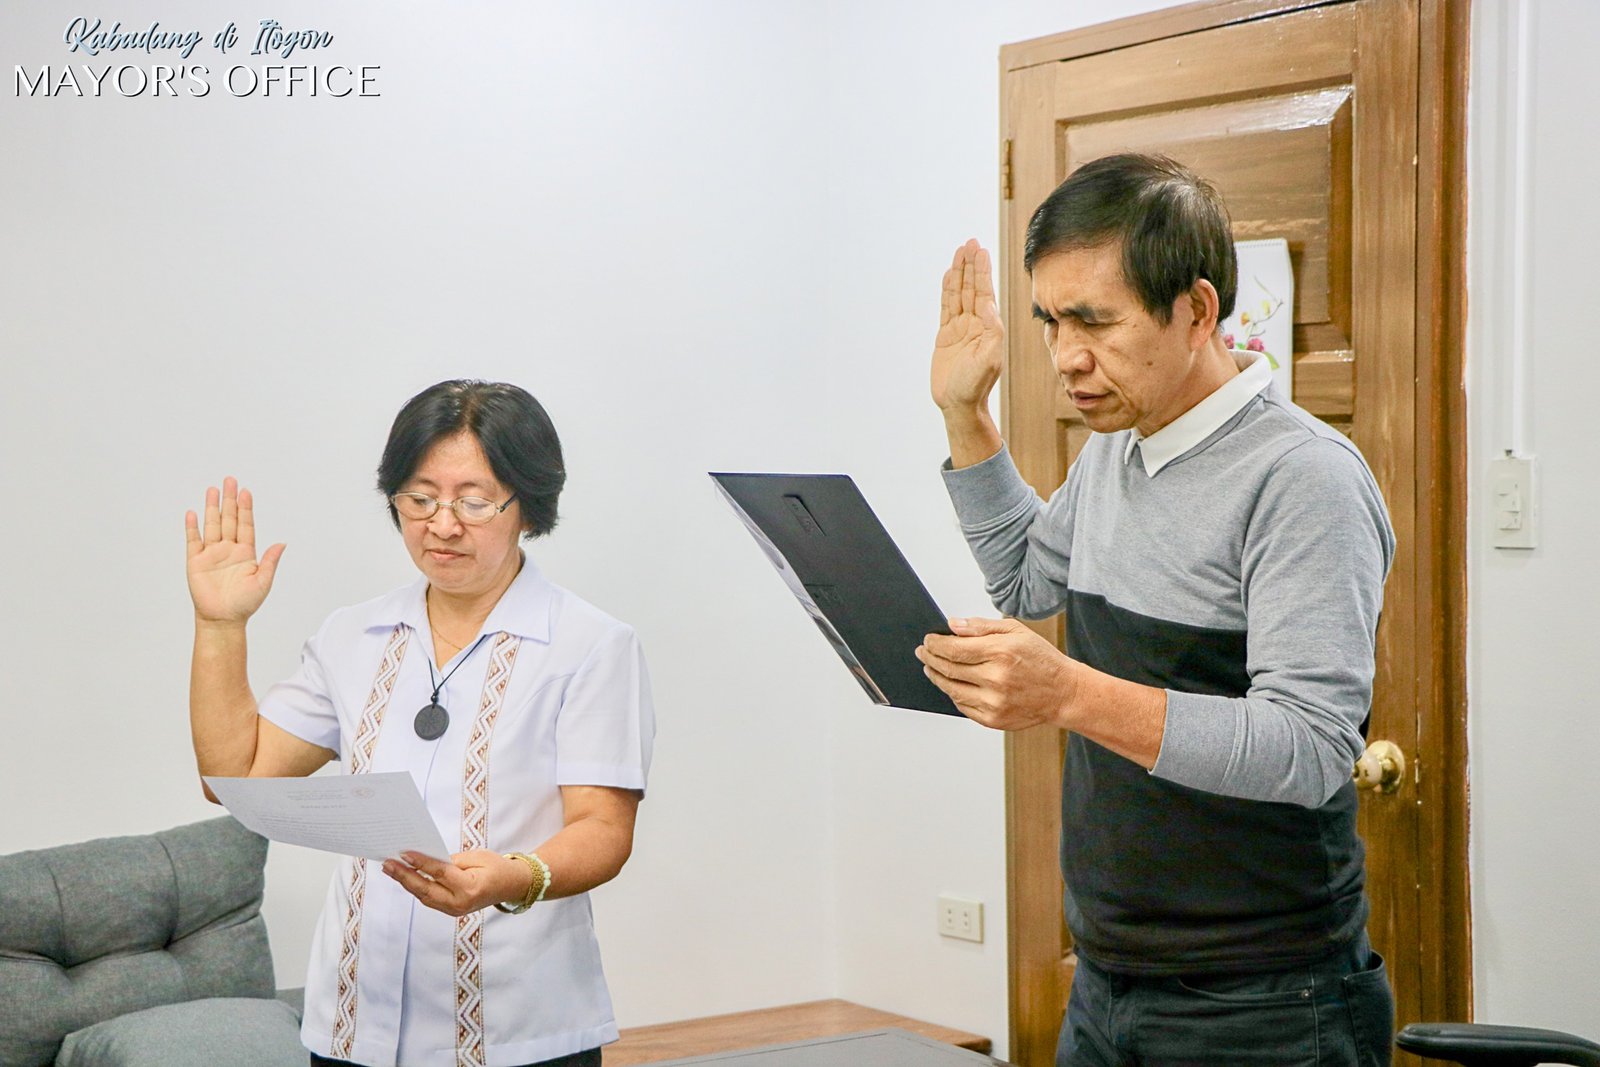 NEW MUNICIPAL BUDGET OFFICER TAKES OATH